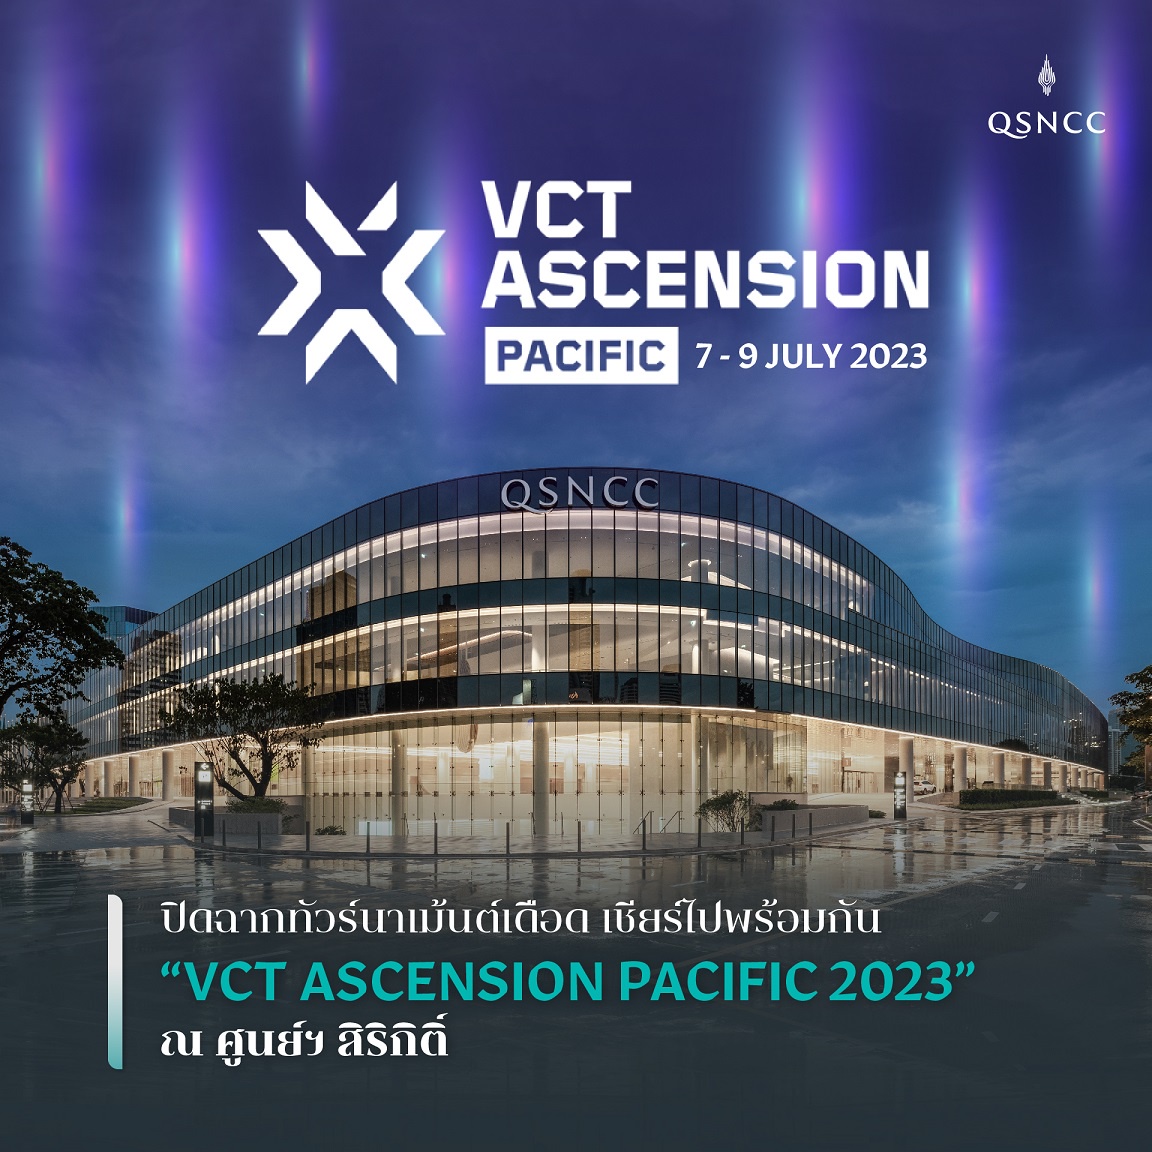 Cheer for your favorite team during the final round of VCT Ascension Pacific 2023 at Queen Sirikit National Convention Center